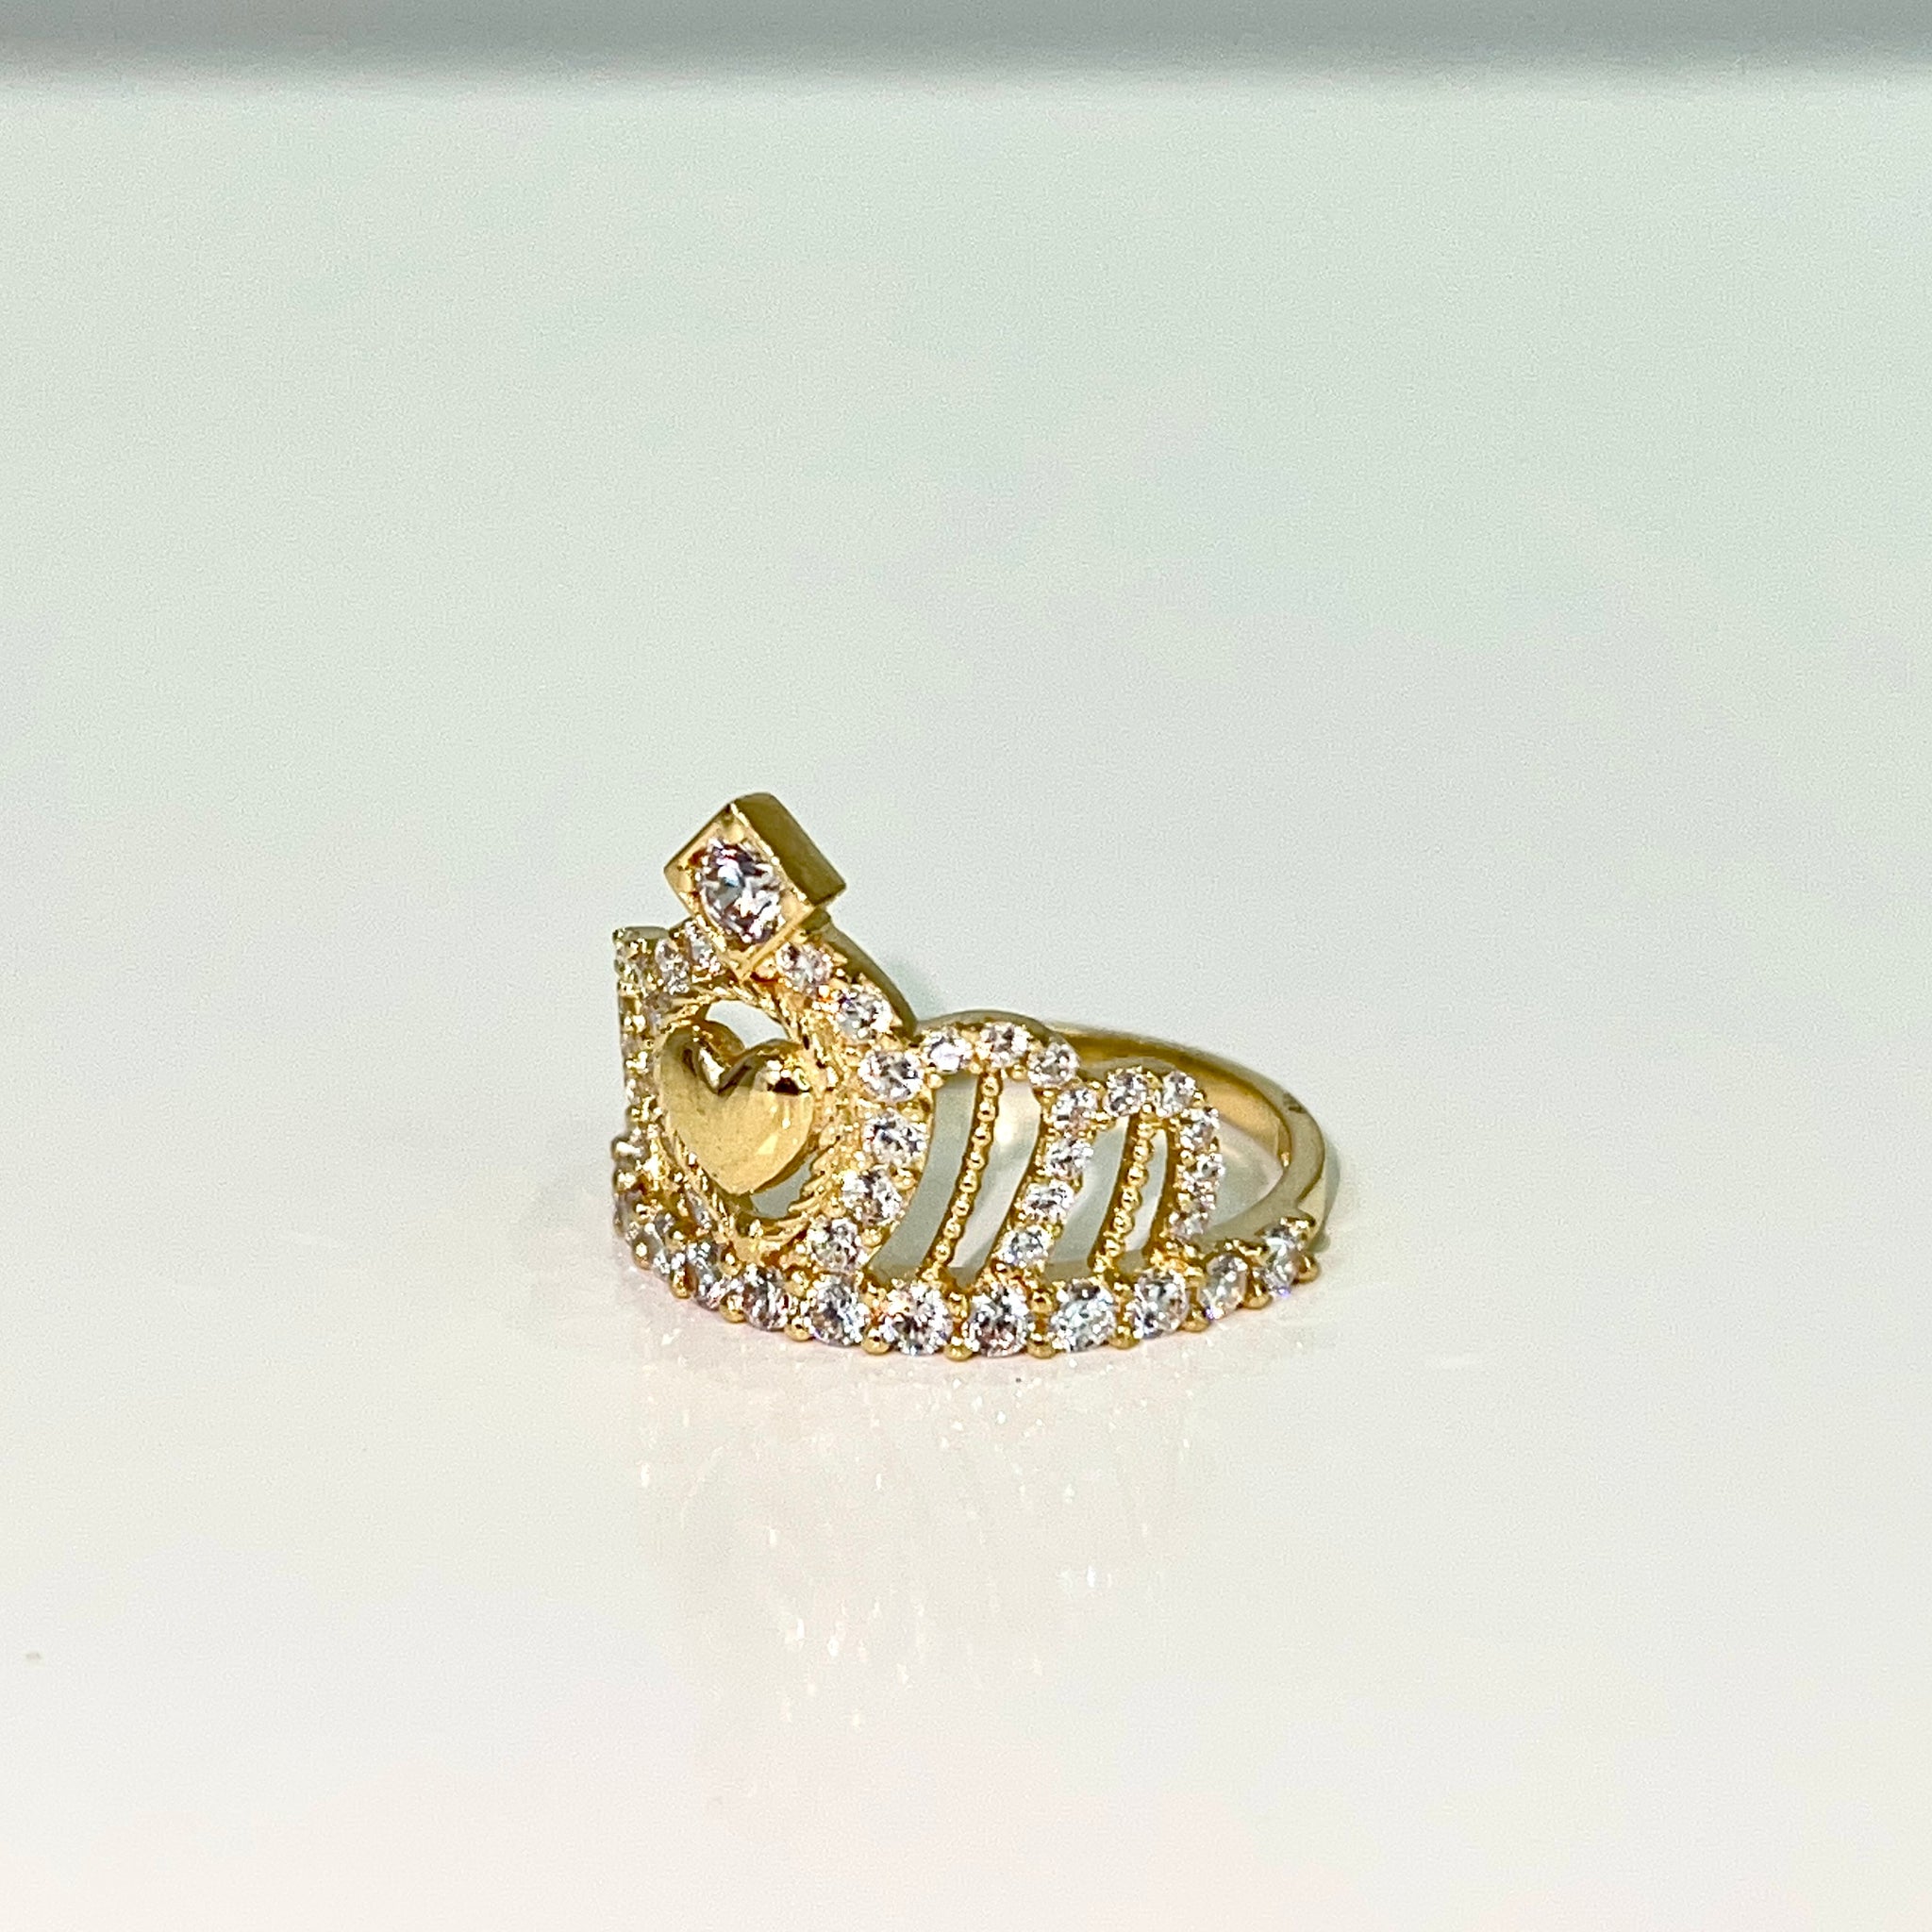 Crown Ladies Ring "Iced Out" - 18 carat gold